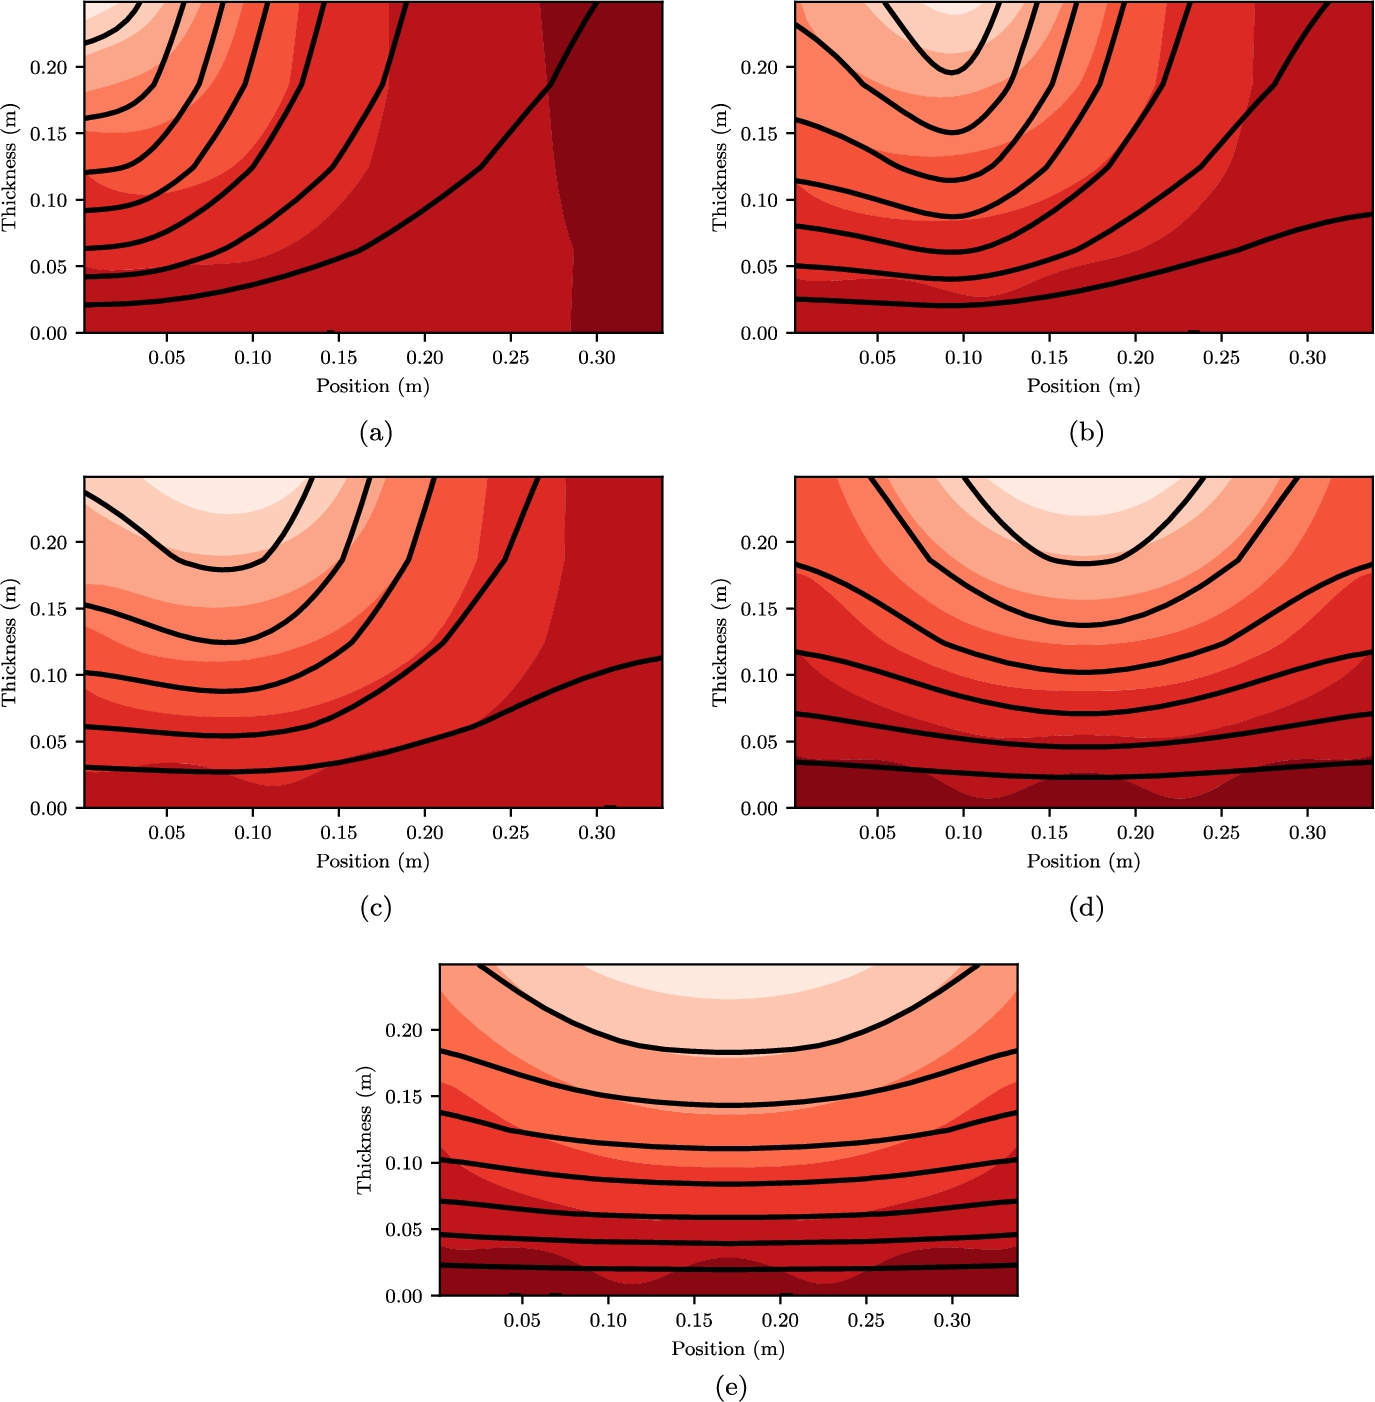 Displacement contours for static loads, wide FE model vs reduced order. Cases are reduced order (solid lines), and wide FE model (colored contour). Subplots correspond to the lines in Fig. 5.